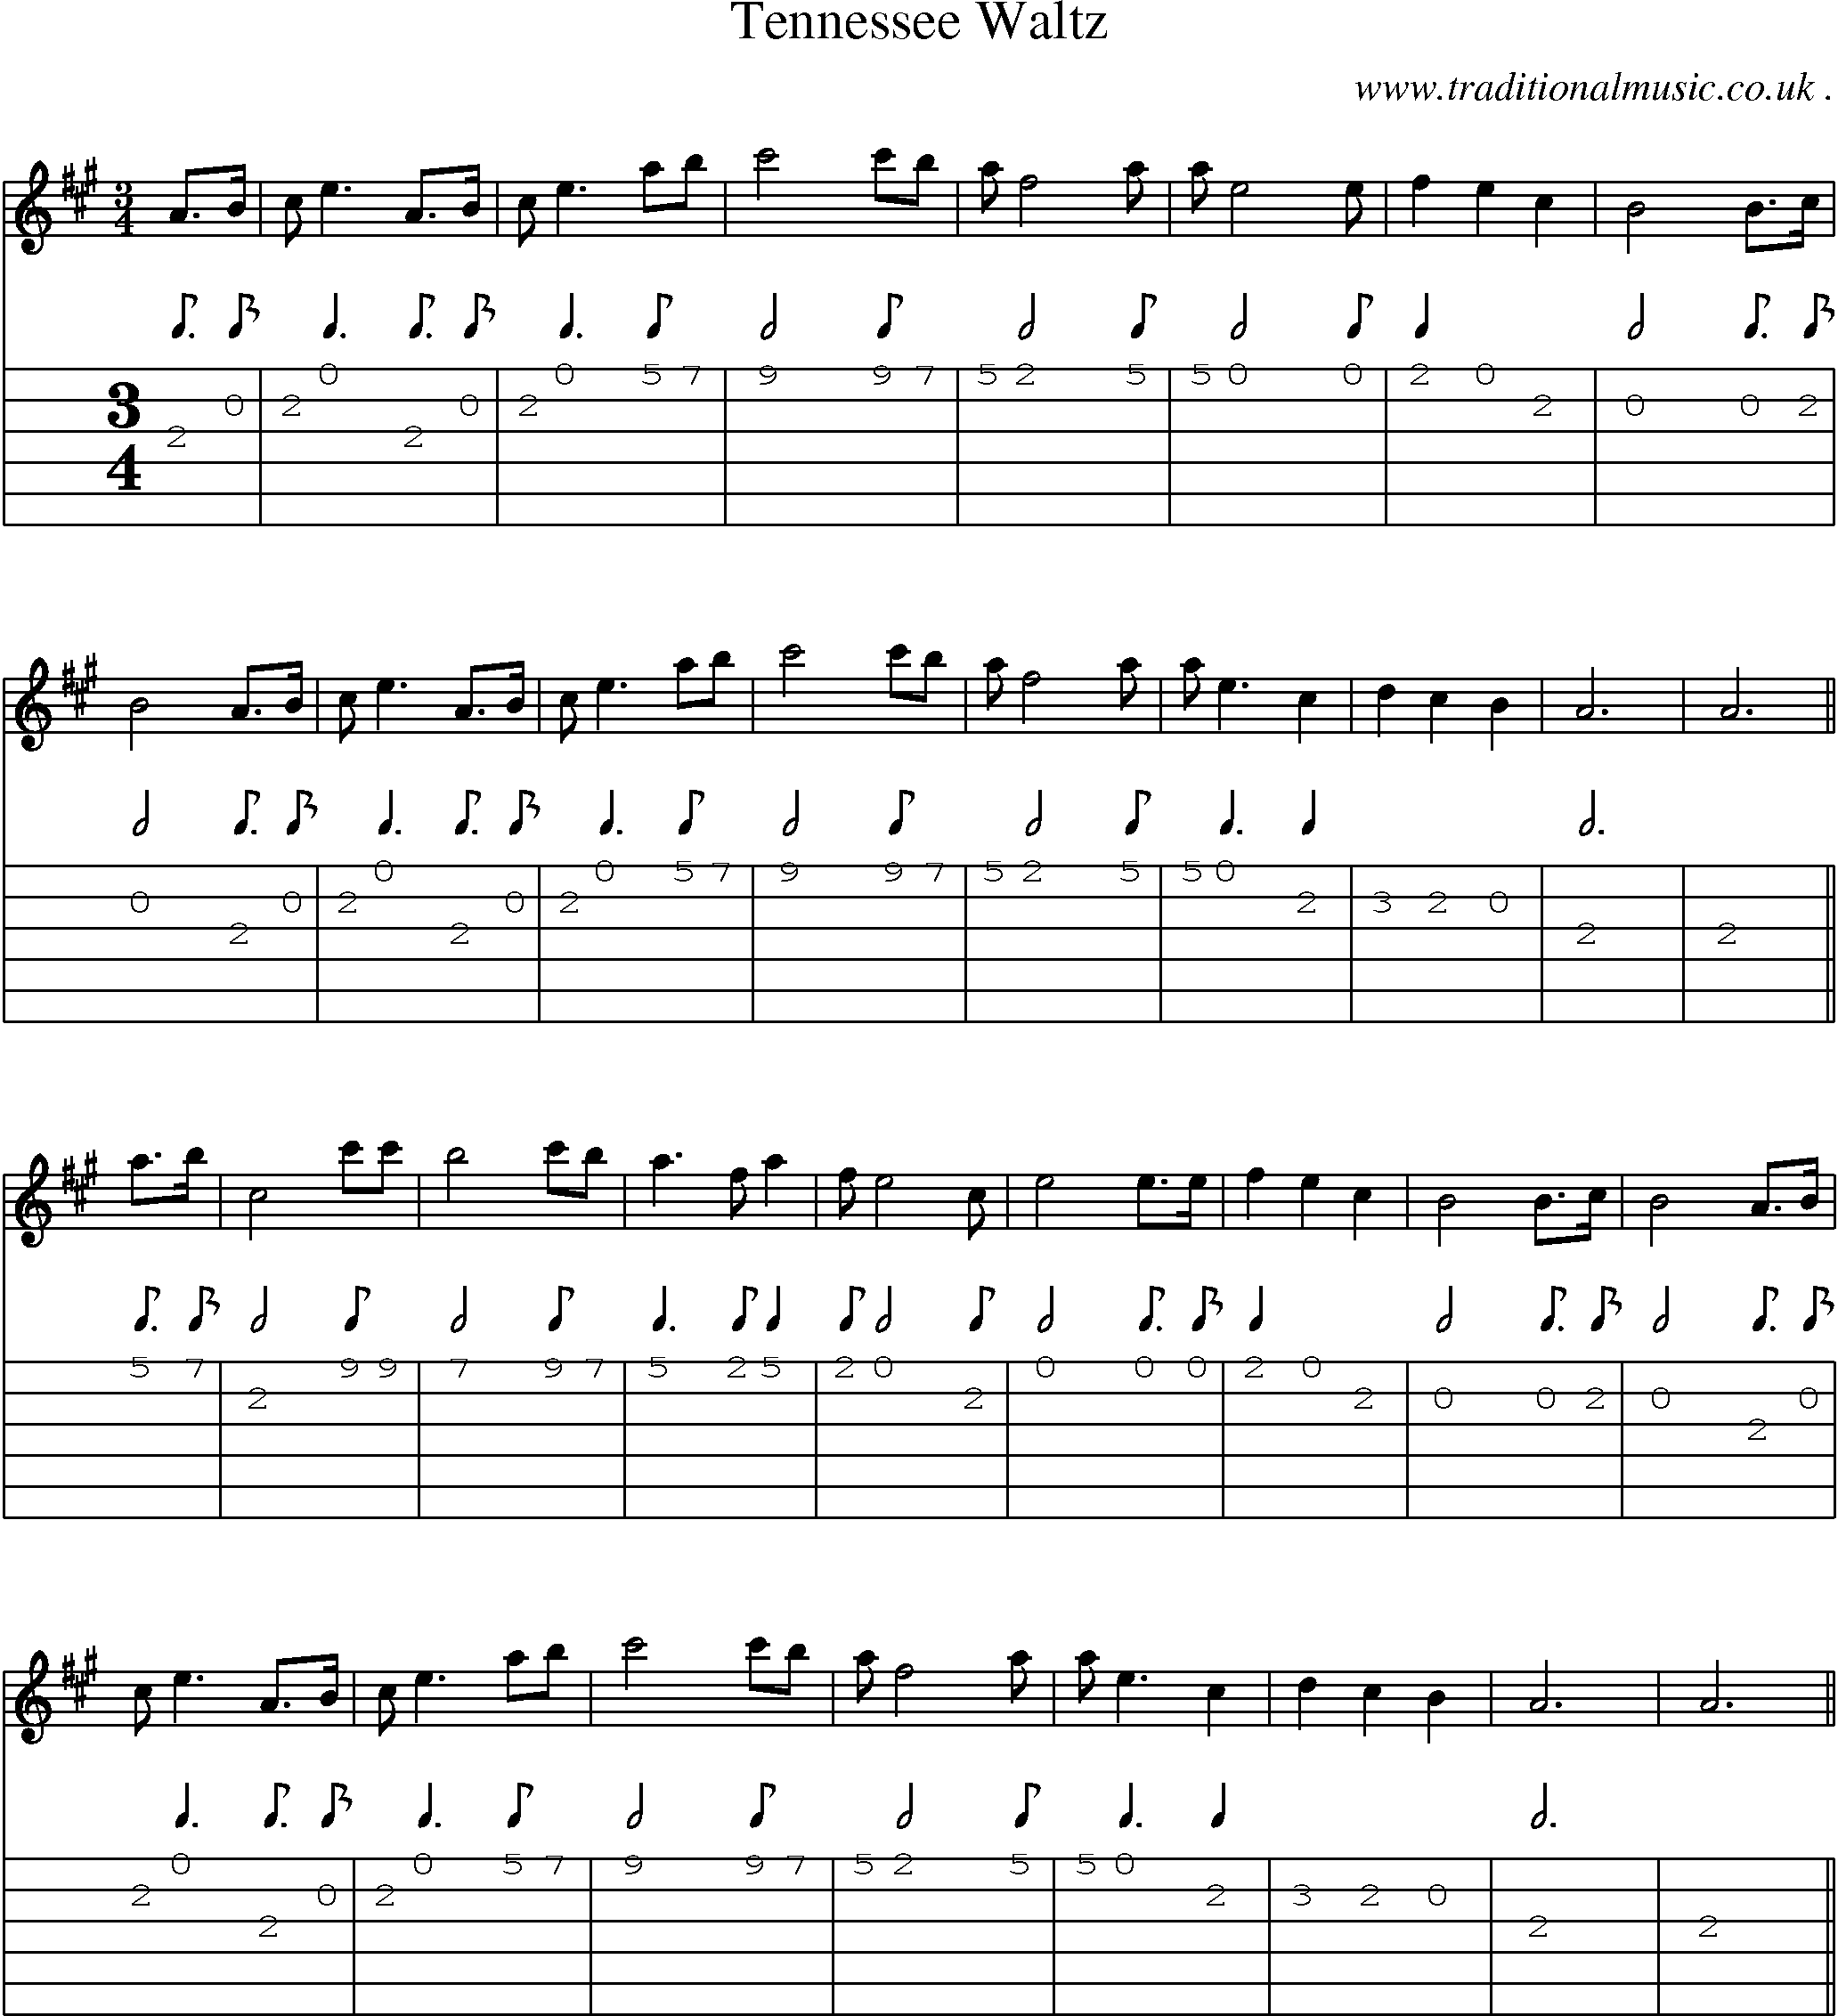 Sheet-Music and Guitar Tabs for Tennessee Waltz